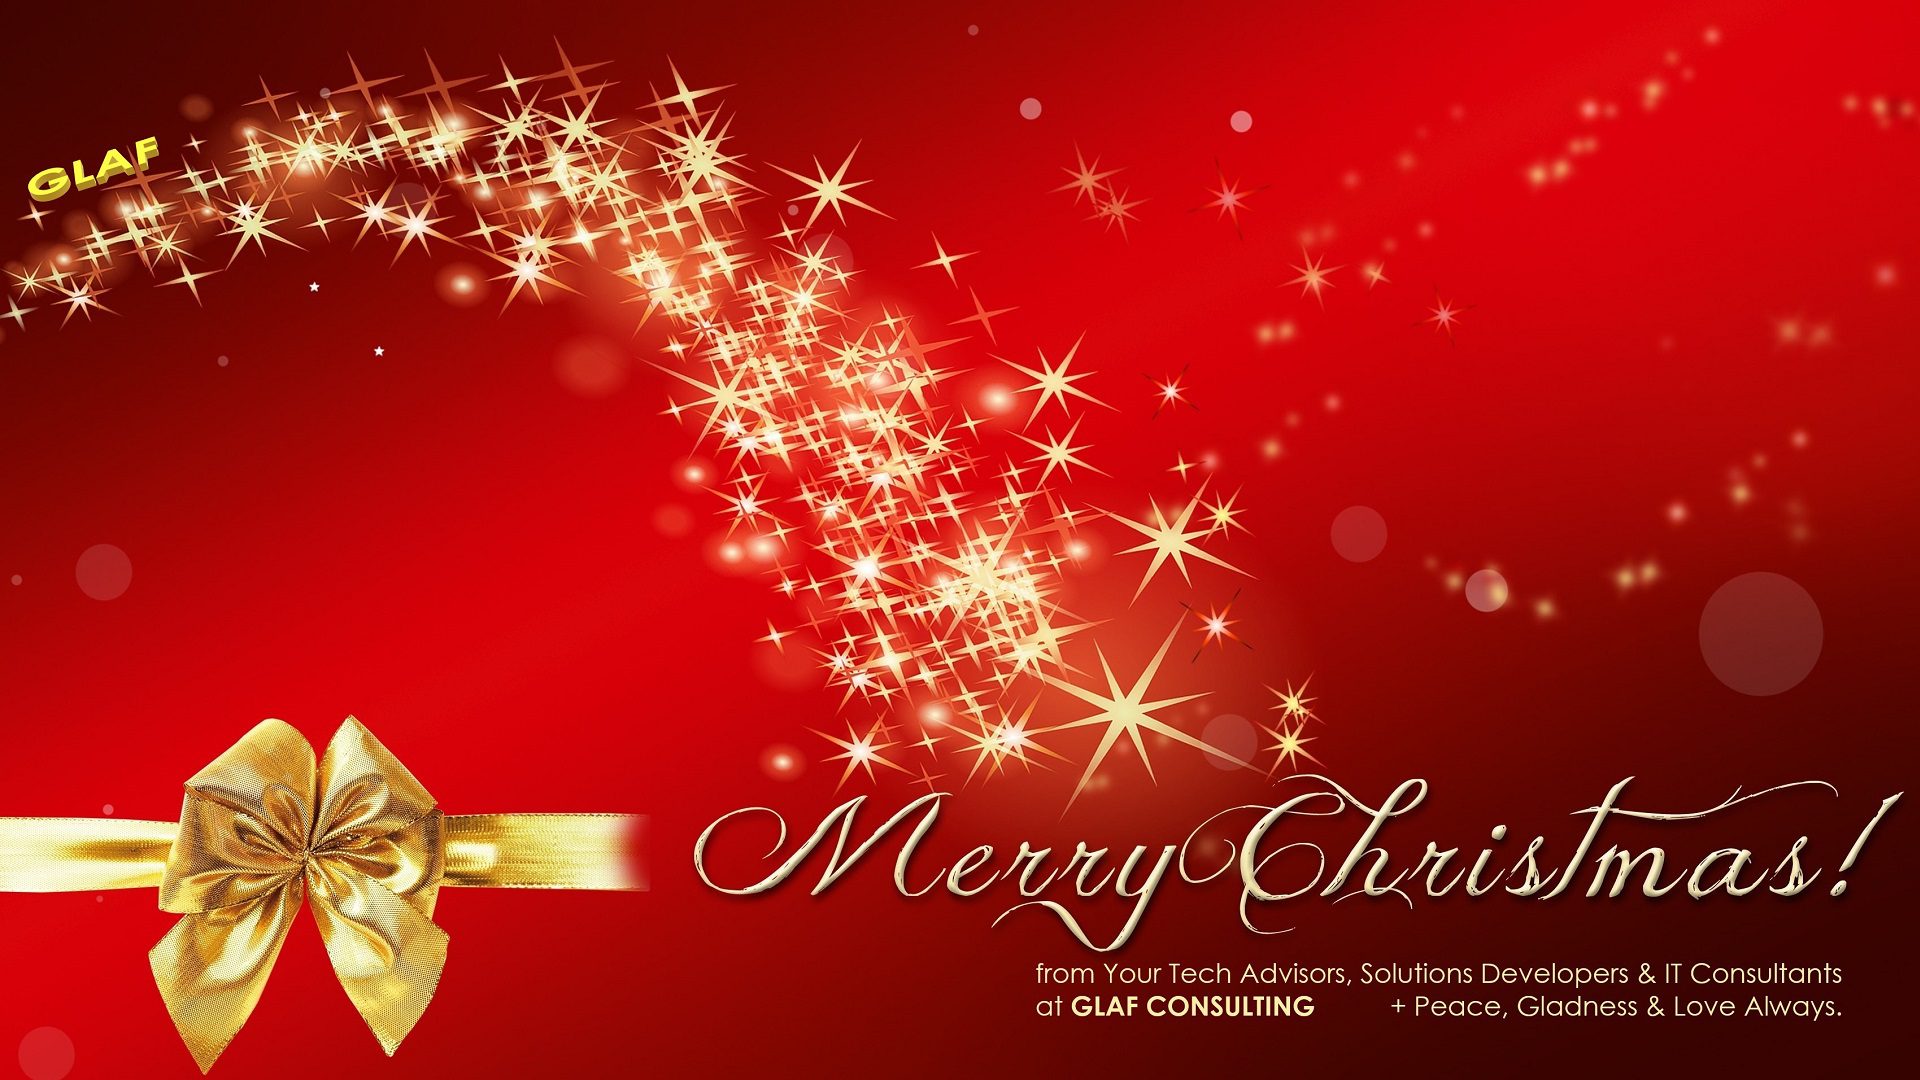 Merry Christmas! from Your GLAF Tech Advisors, Solutions Developers & IT Consultants at GLAF CONSULTING® with Peace, Gladness and Love Always!